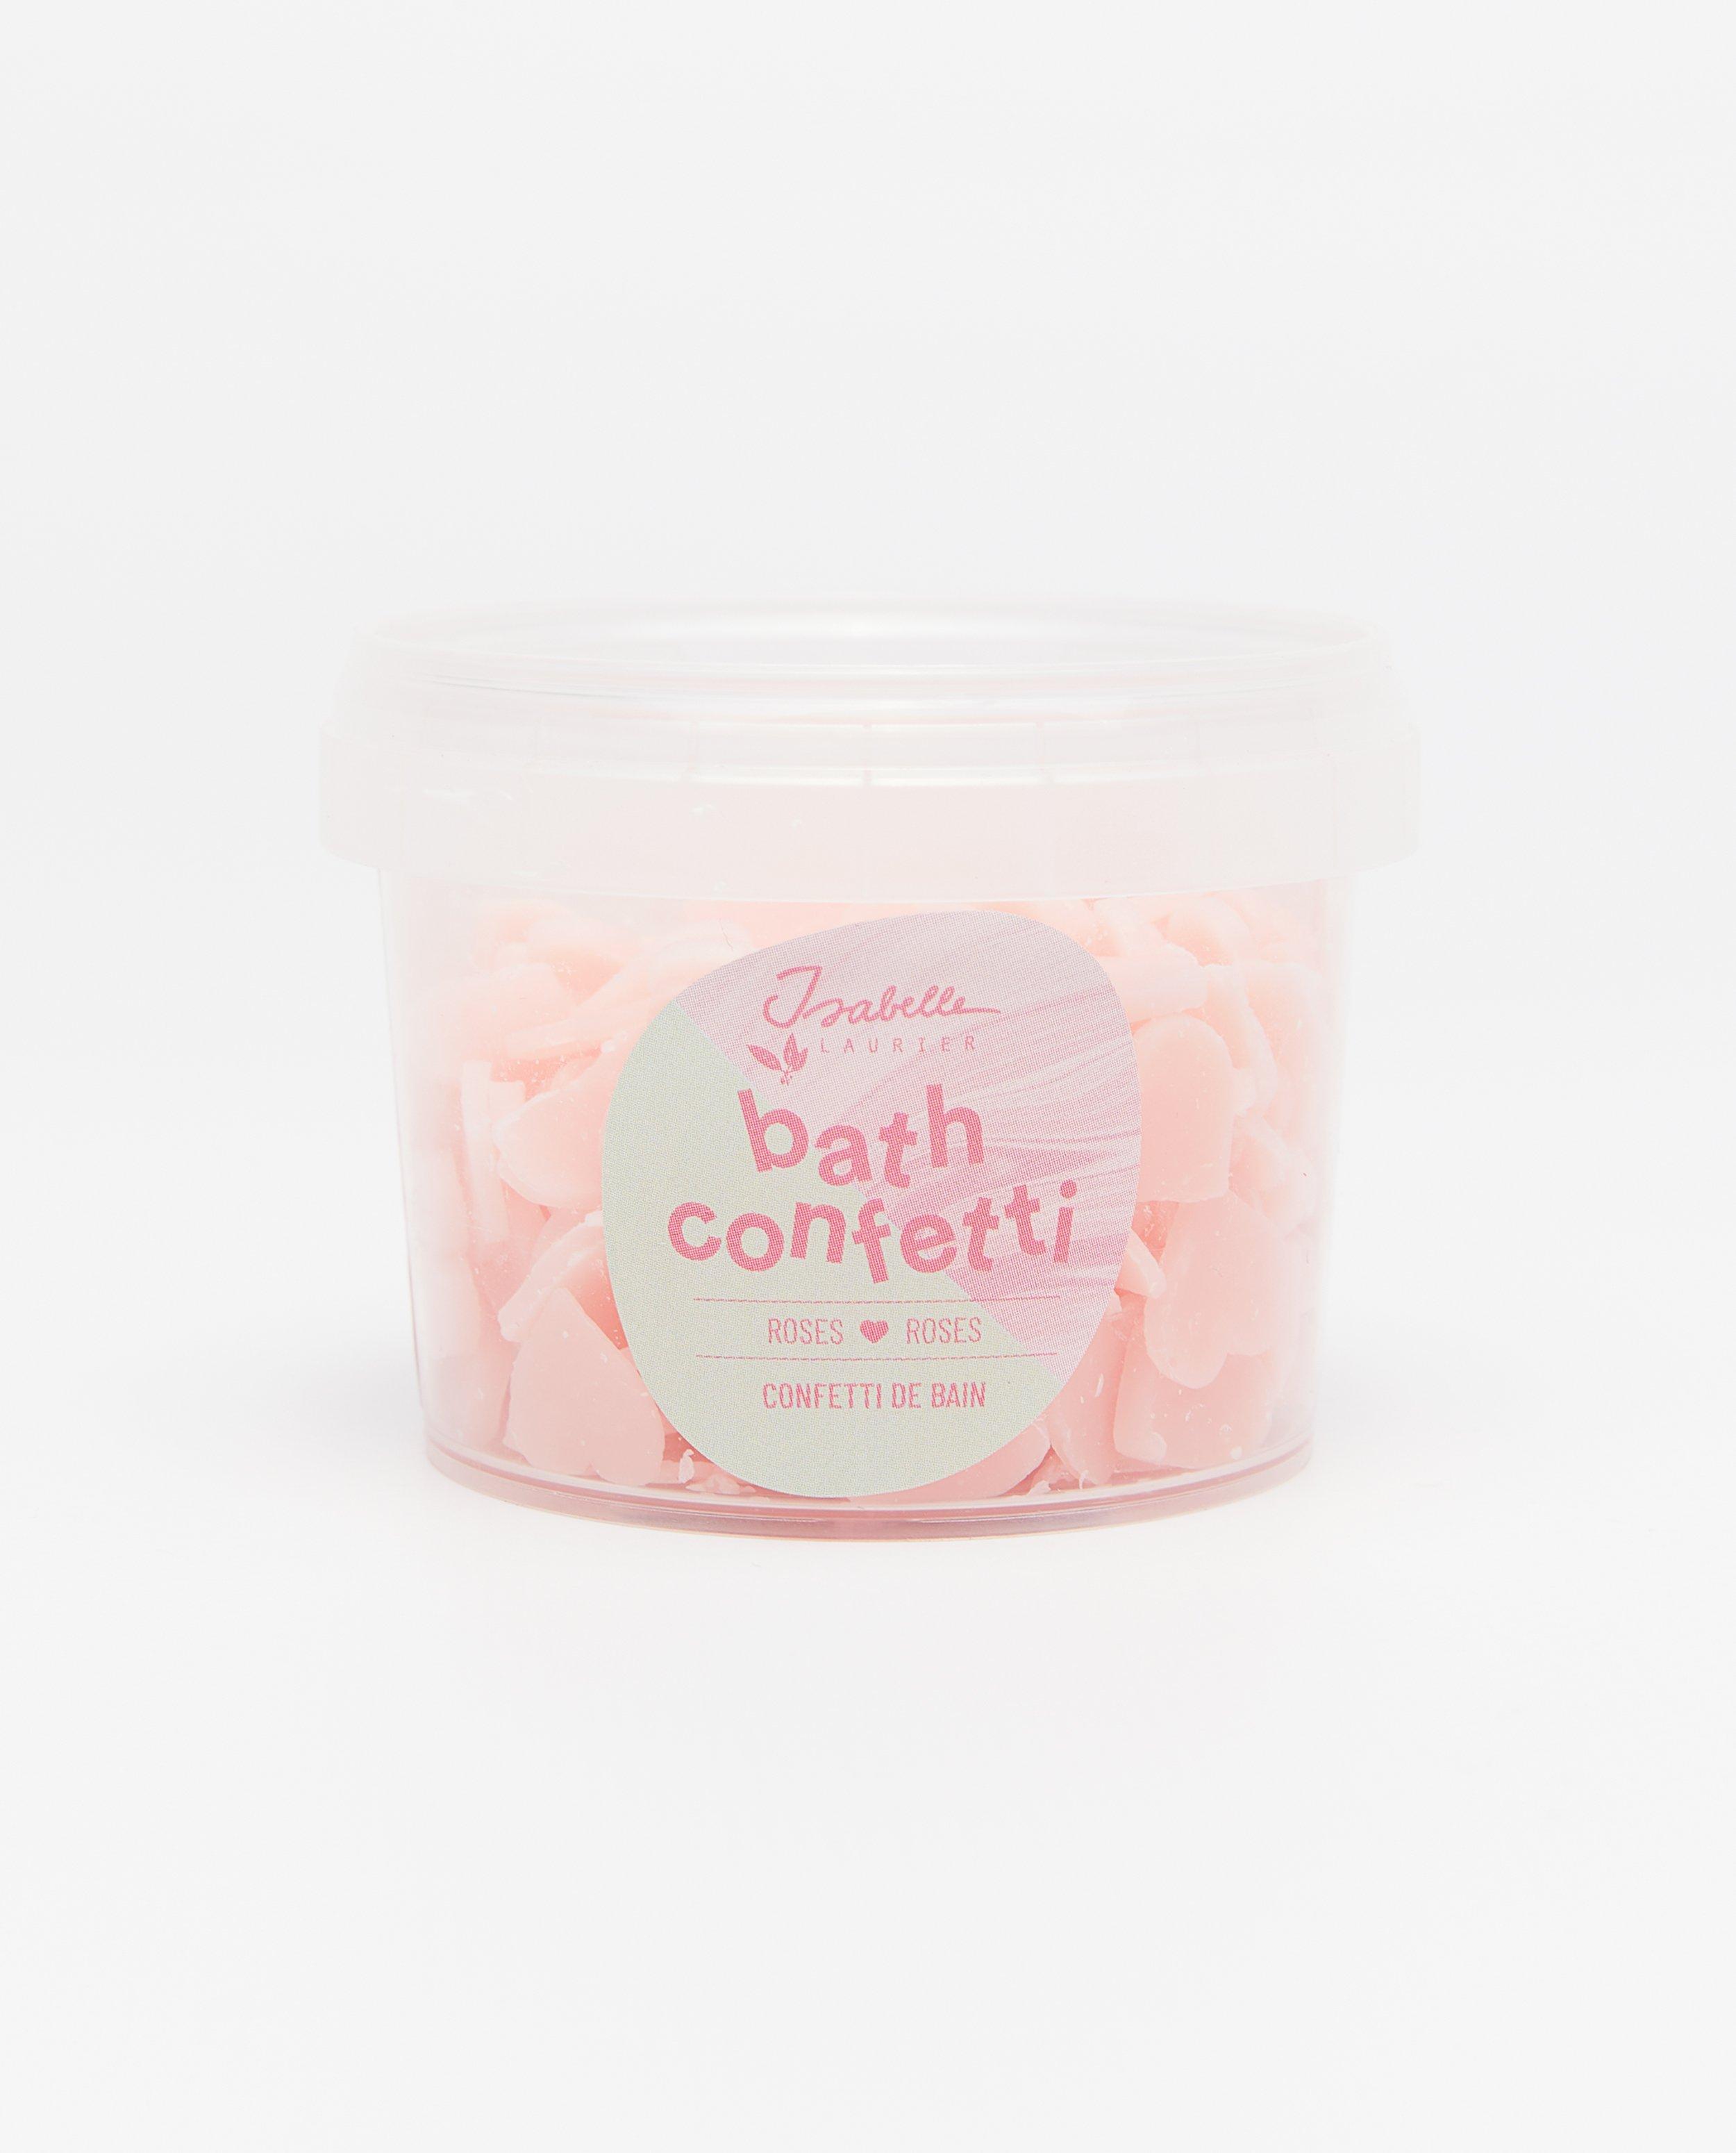 Roses badconfetti - null - Isabelle Laurier